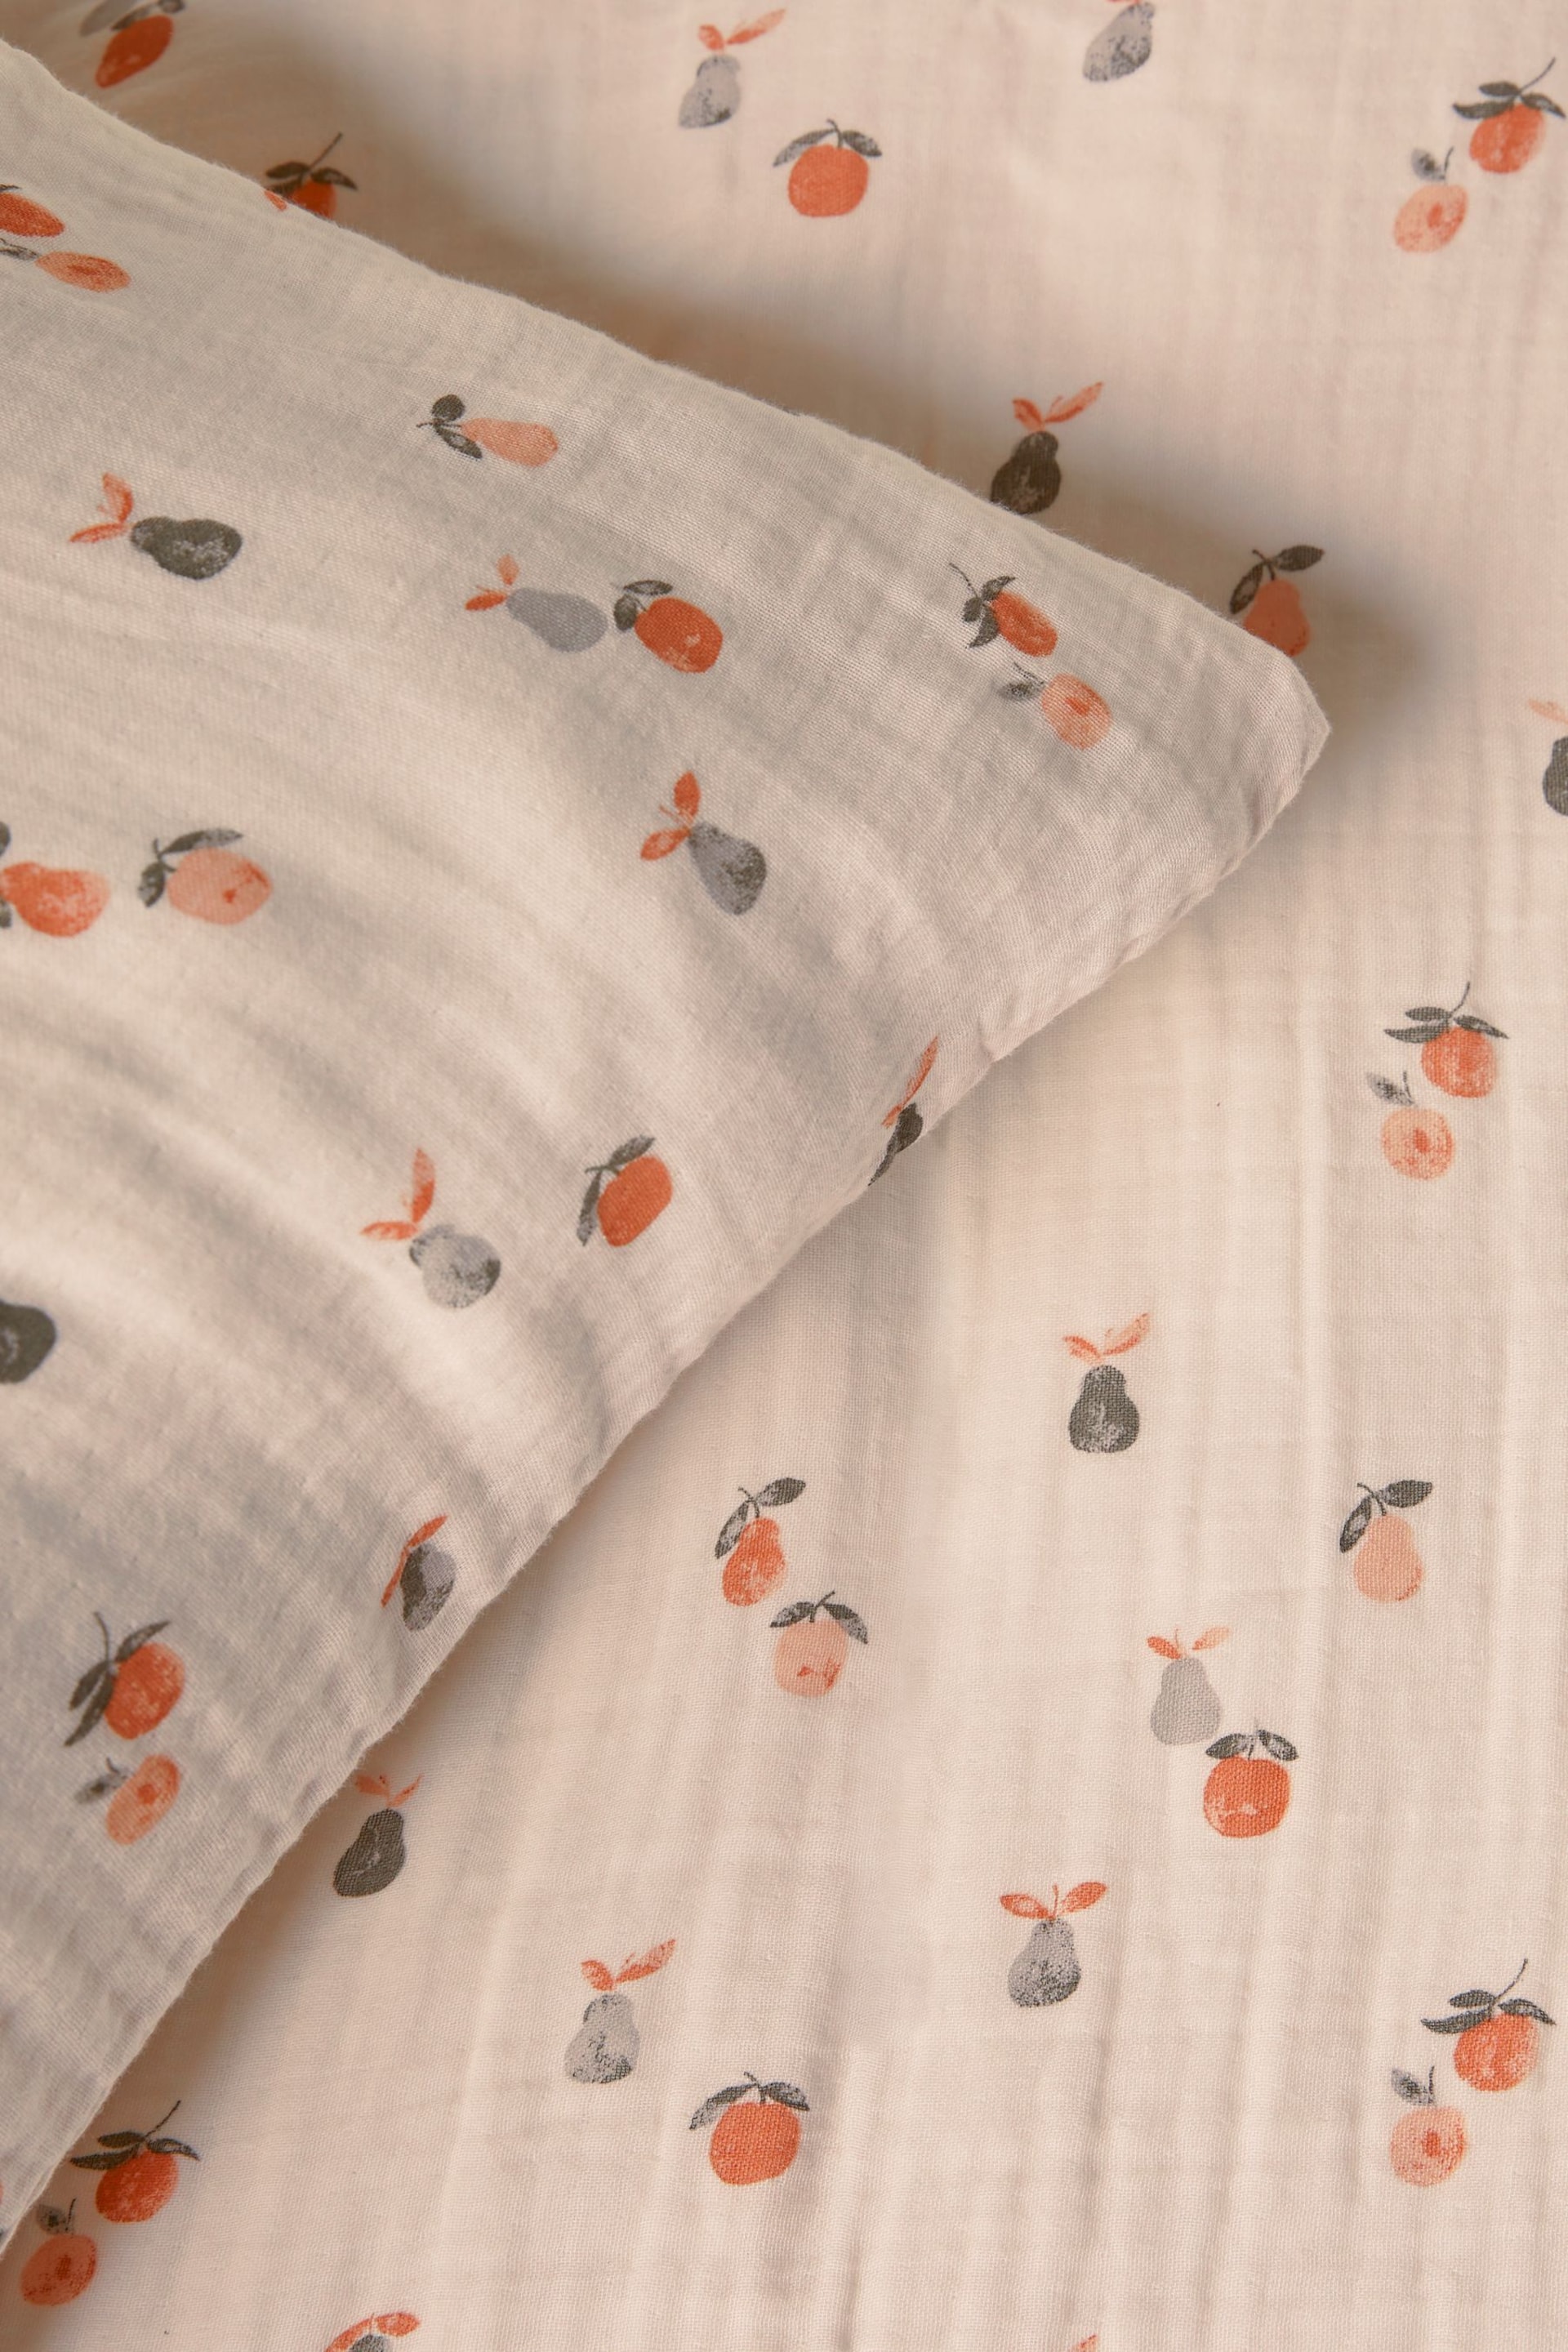 Natural Fruit Print Crinkle Muslin 100% Cotton Duvet Cover and Pillowcase Set - Image 4 of 7